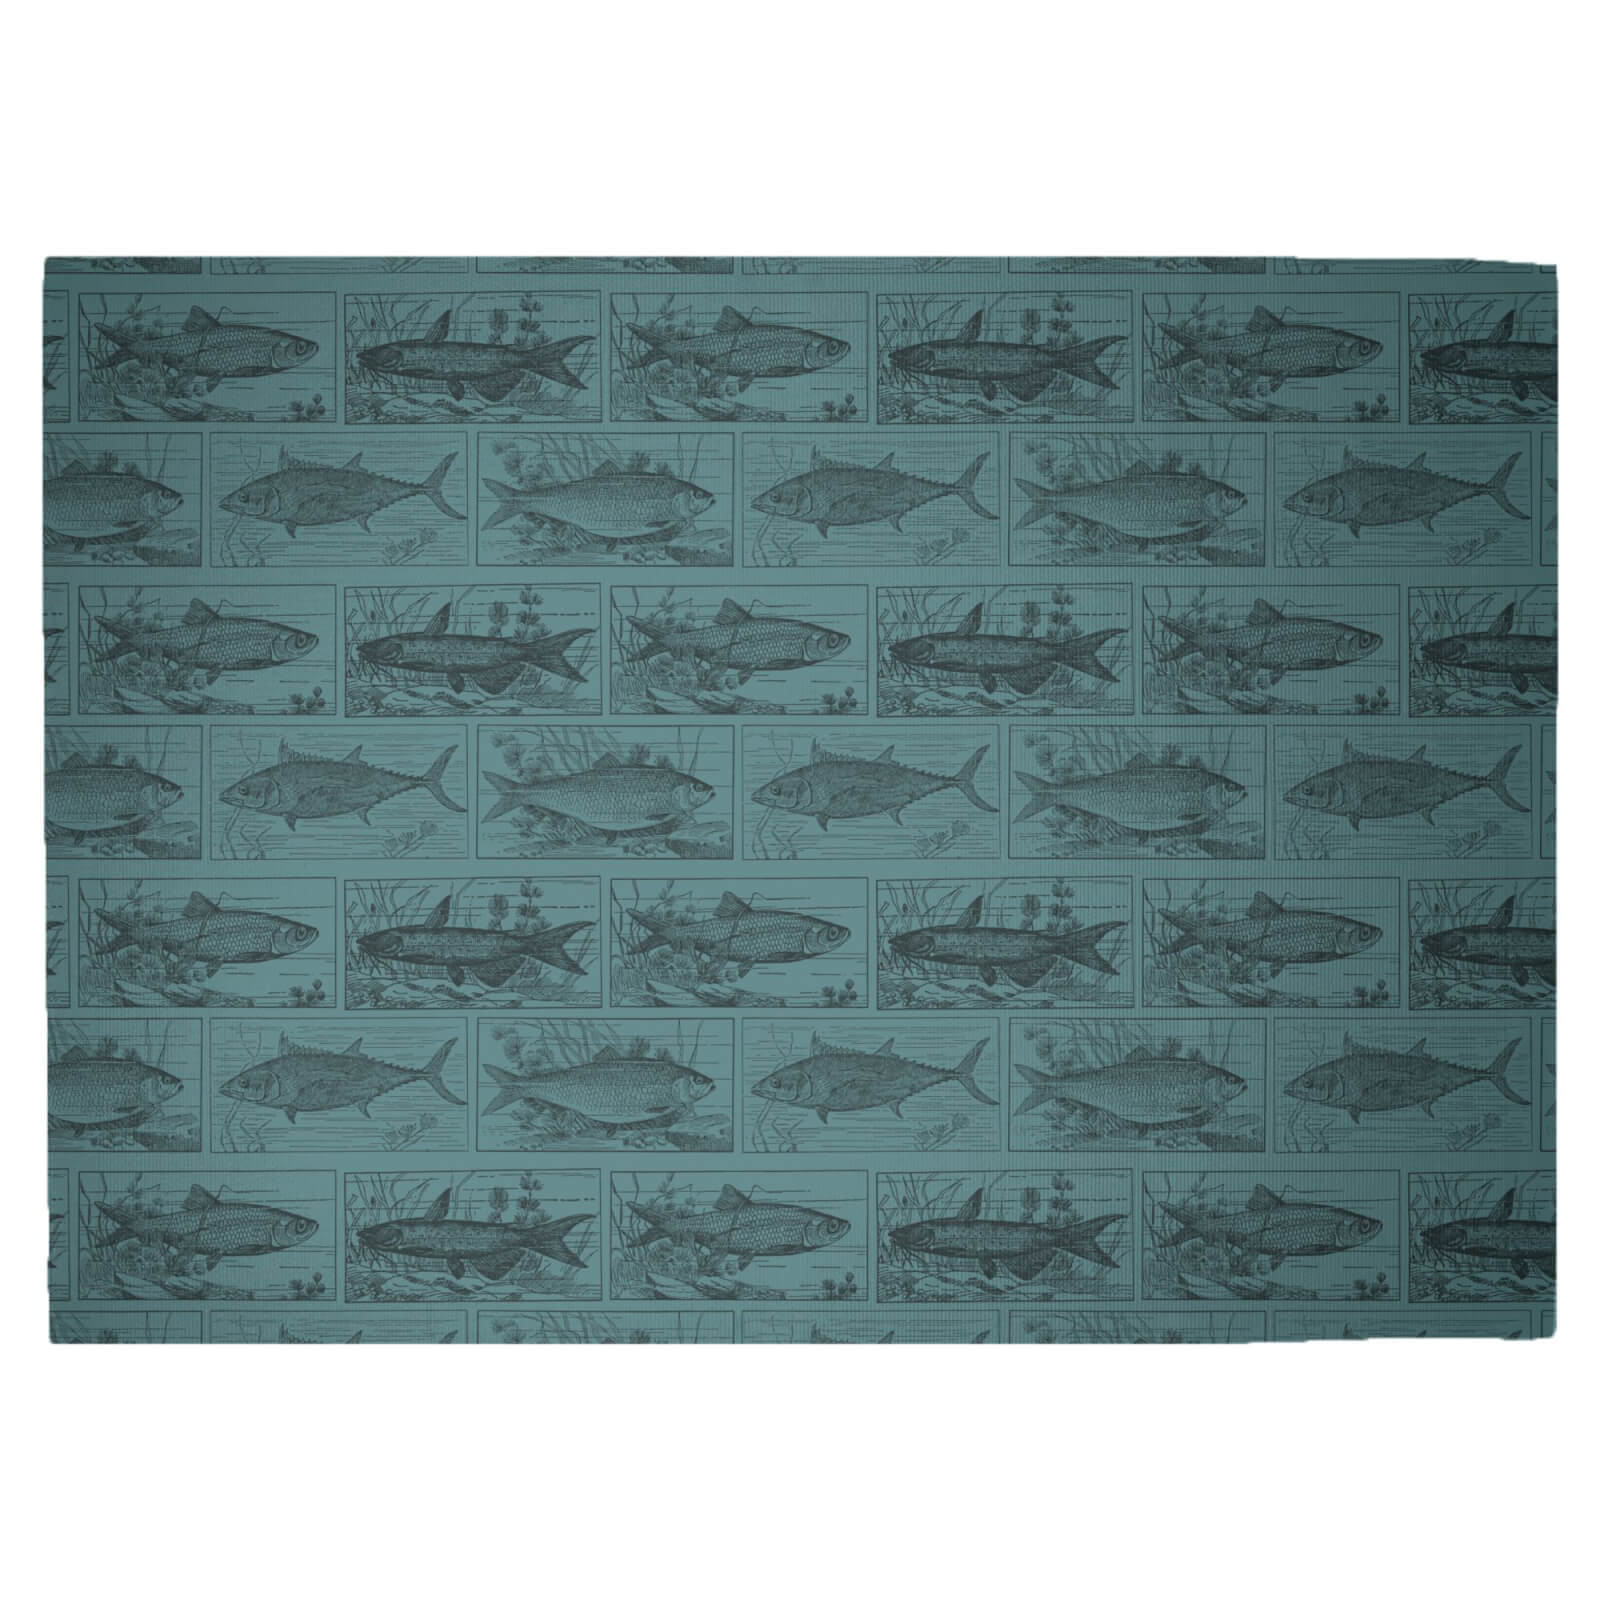 Fish Woven Rug - Large